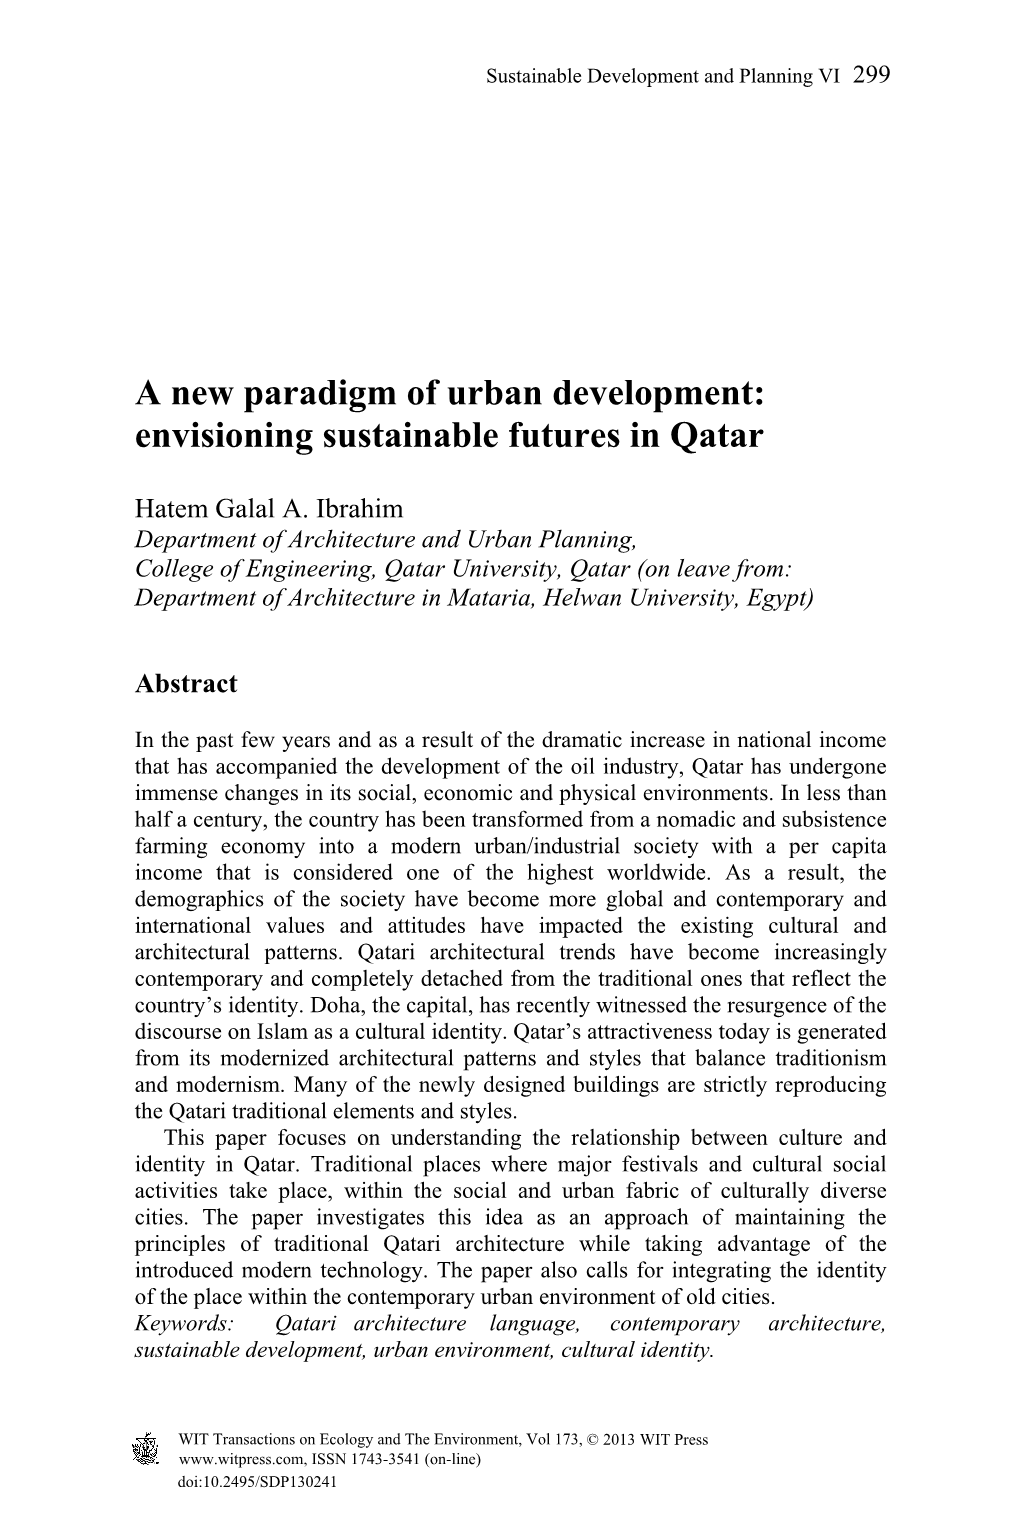 A New Paradigm of Urban Development: Envisioning Sustainable Futures in Qatar